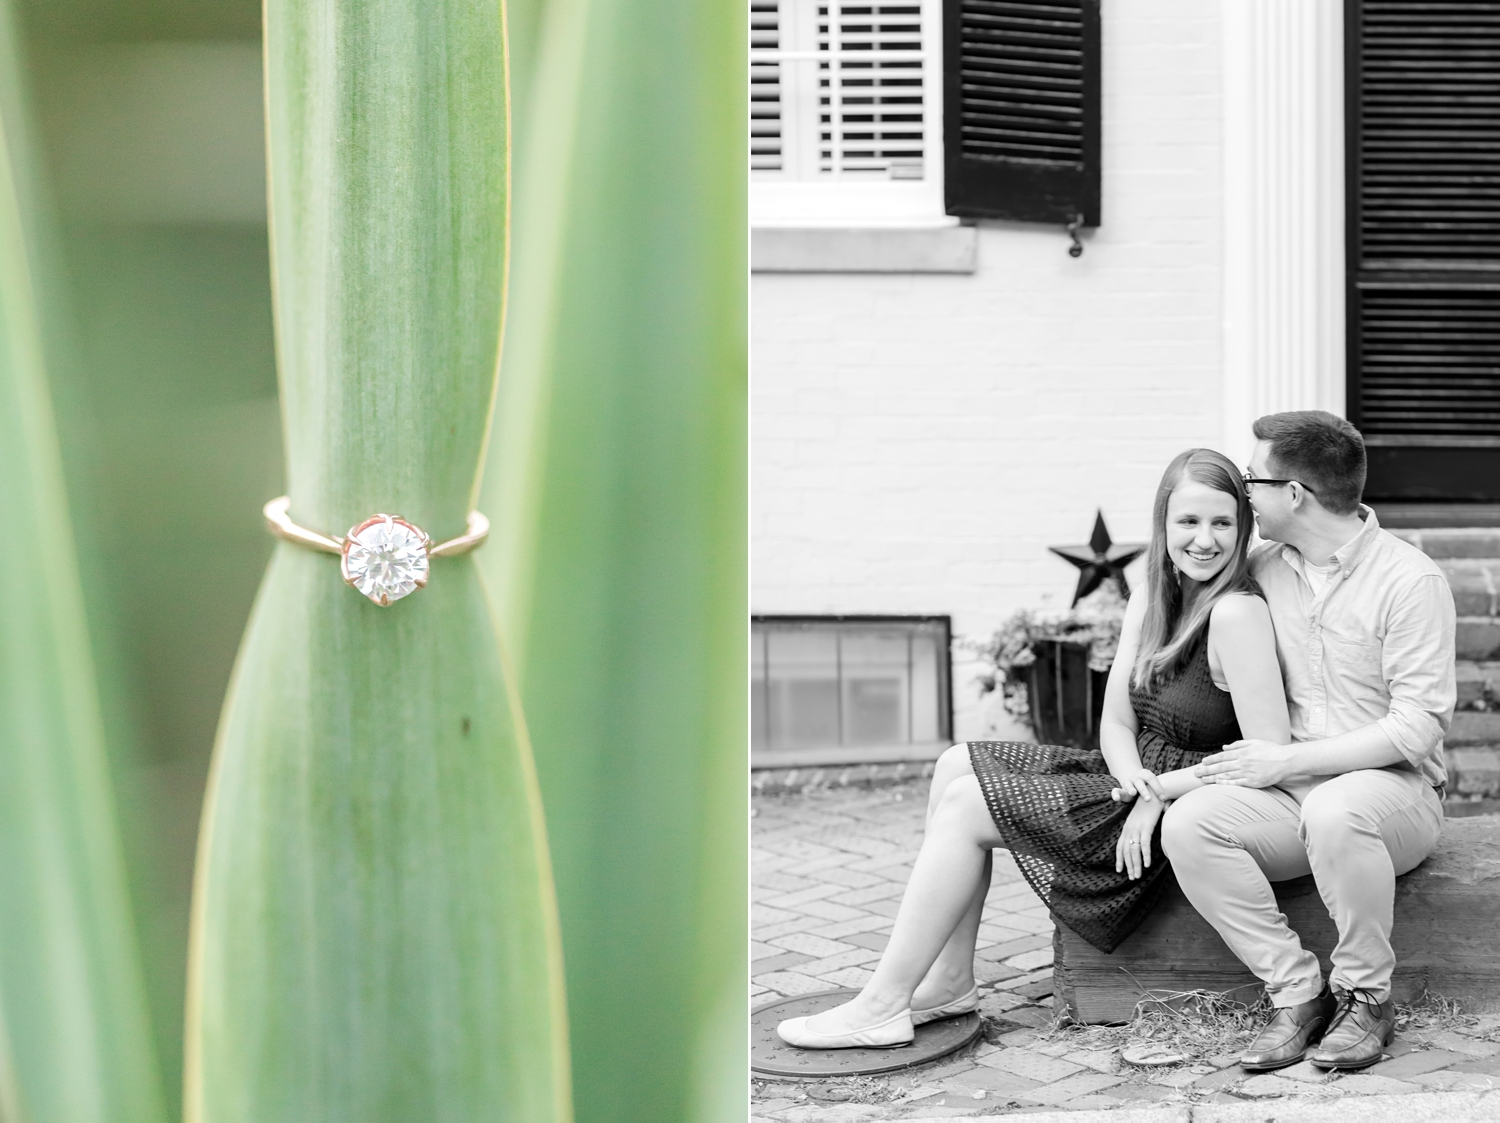  See more from   Chris and Lindy’s engagement session in Old Town Alexandria here  ! 